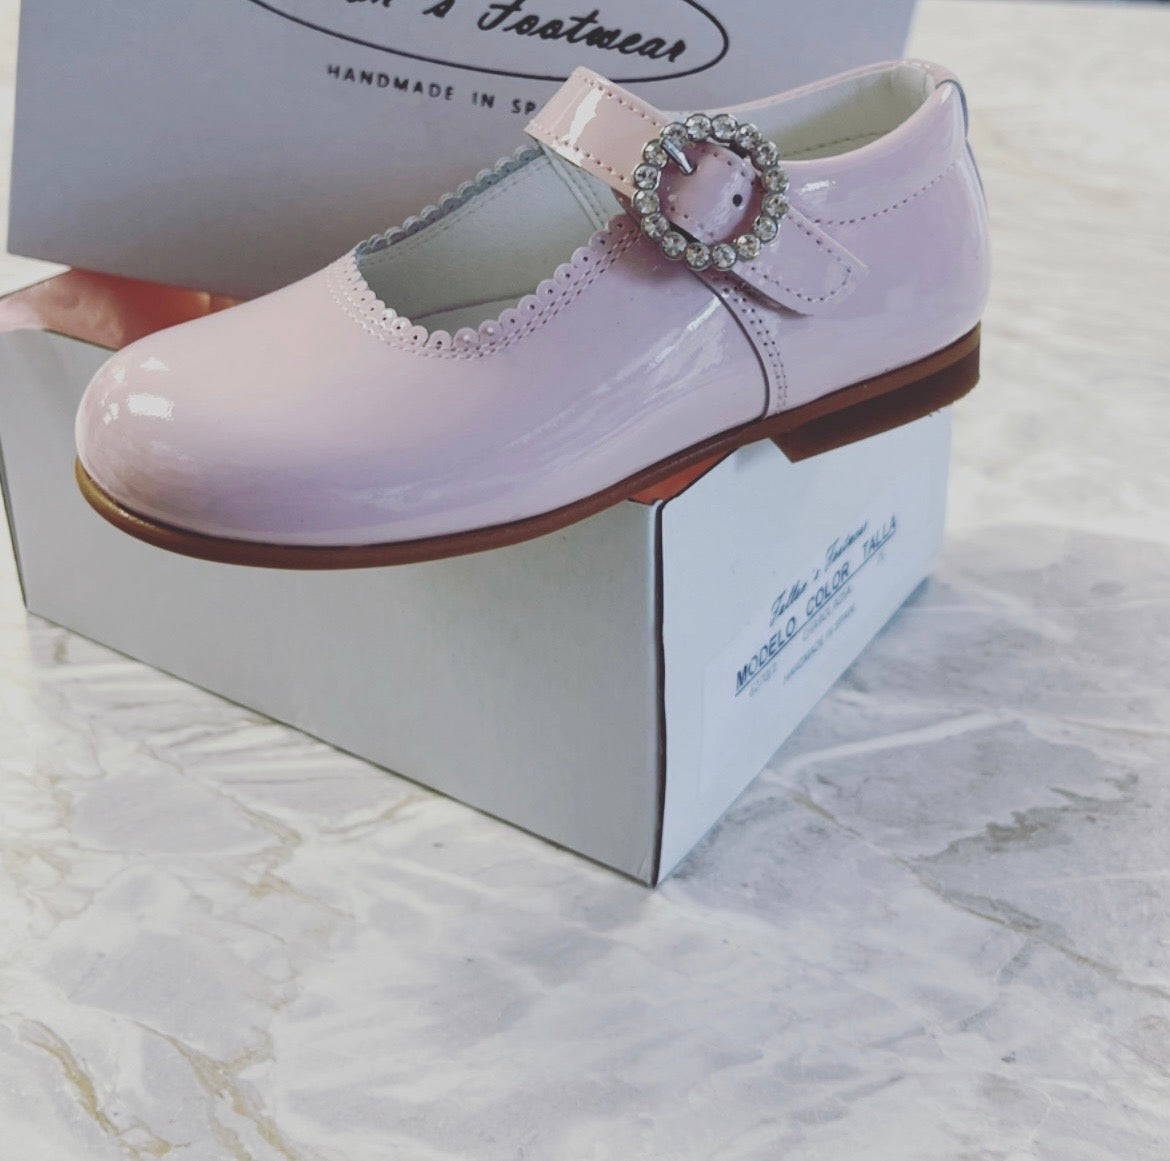 6270-1 Baby Pink Shoe with Diamante Buckle